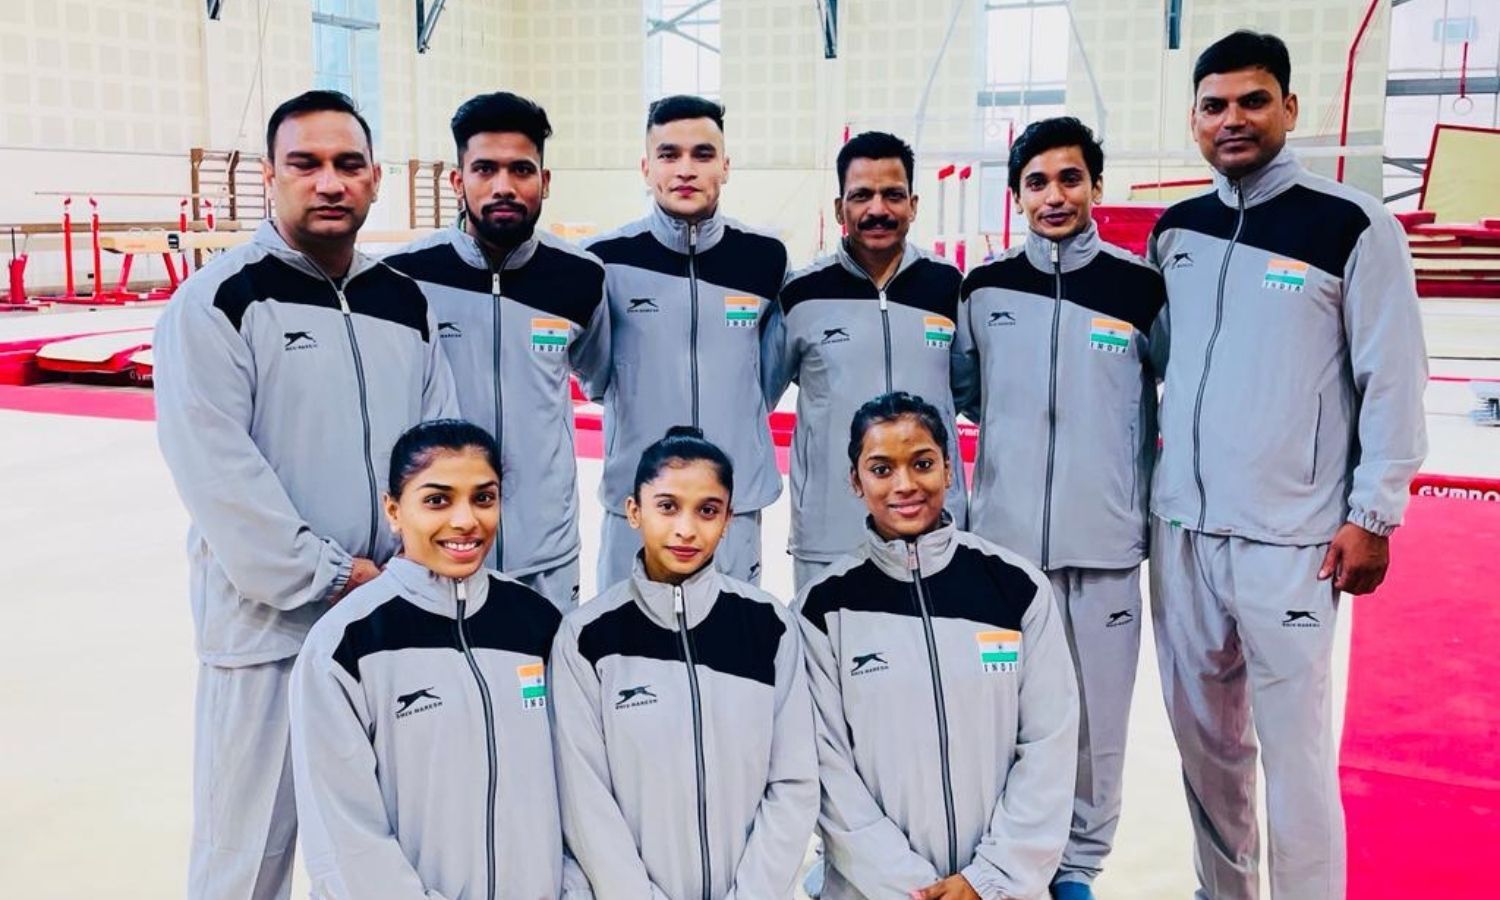 Know all the Indian gymnasts taking part at the World Artistic Gymnastics  Championships